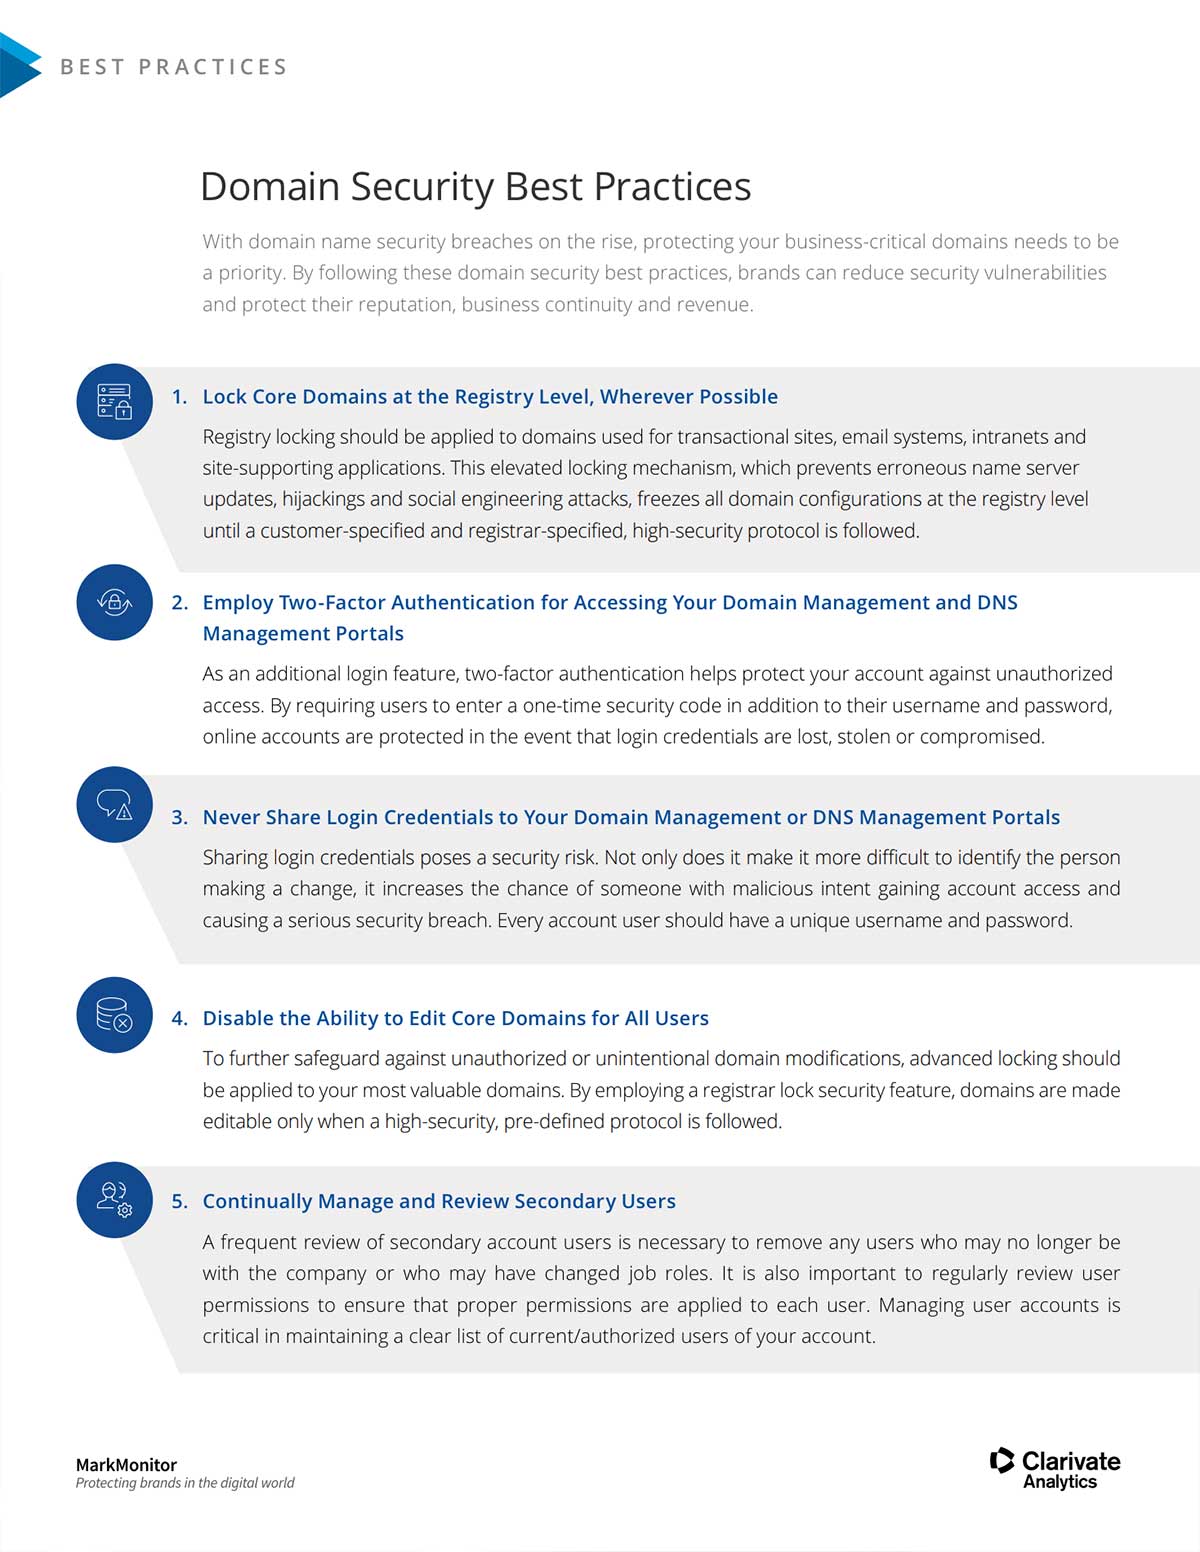 Domain Security Best Practices Markmonitor